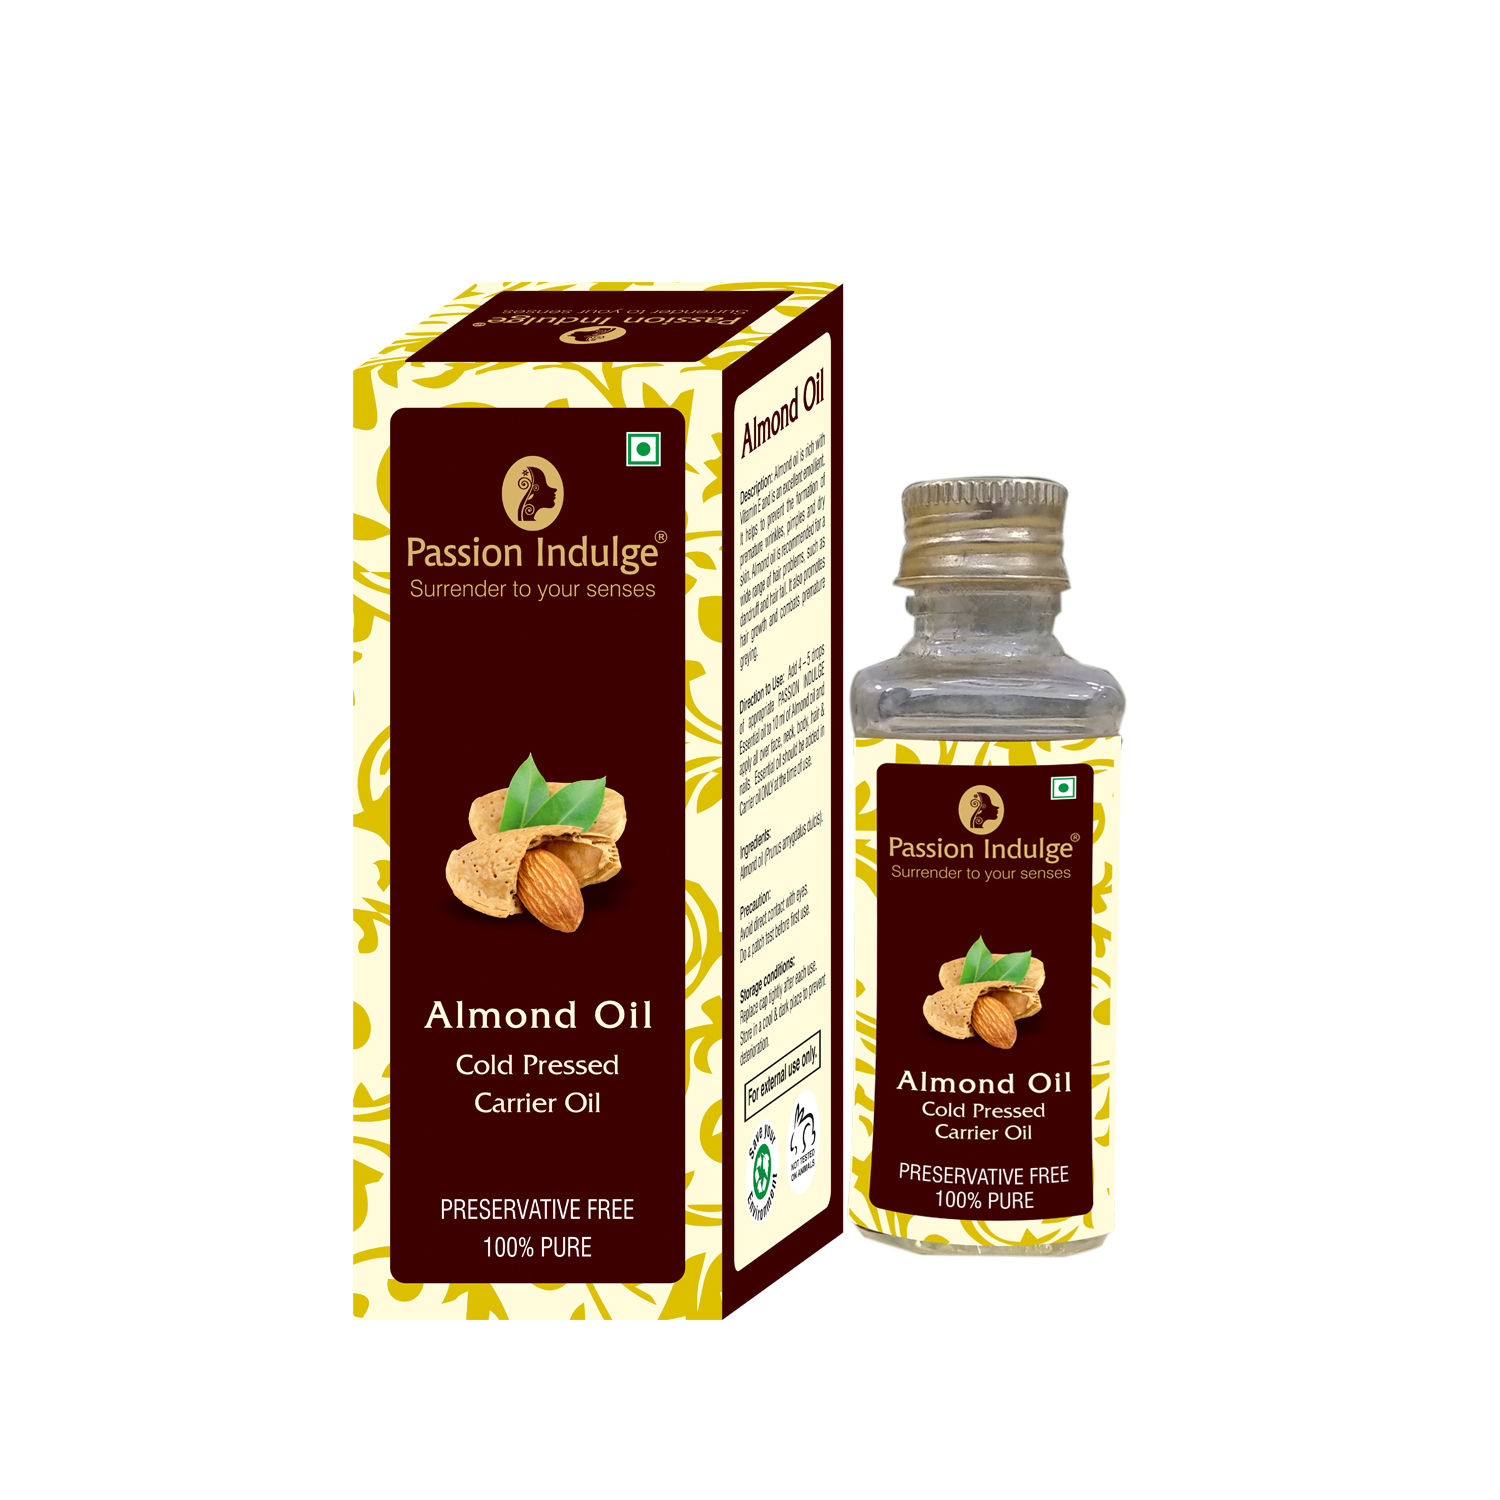 Passion Indulge Natural Almond Carrier Oil for Skin, Hair and Face